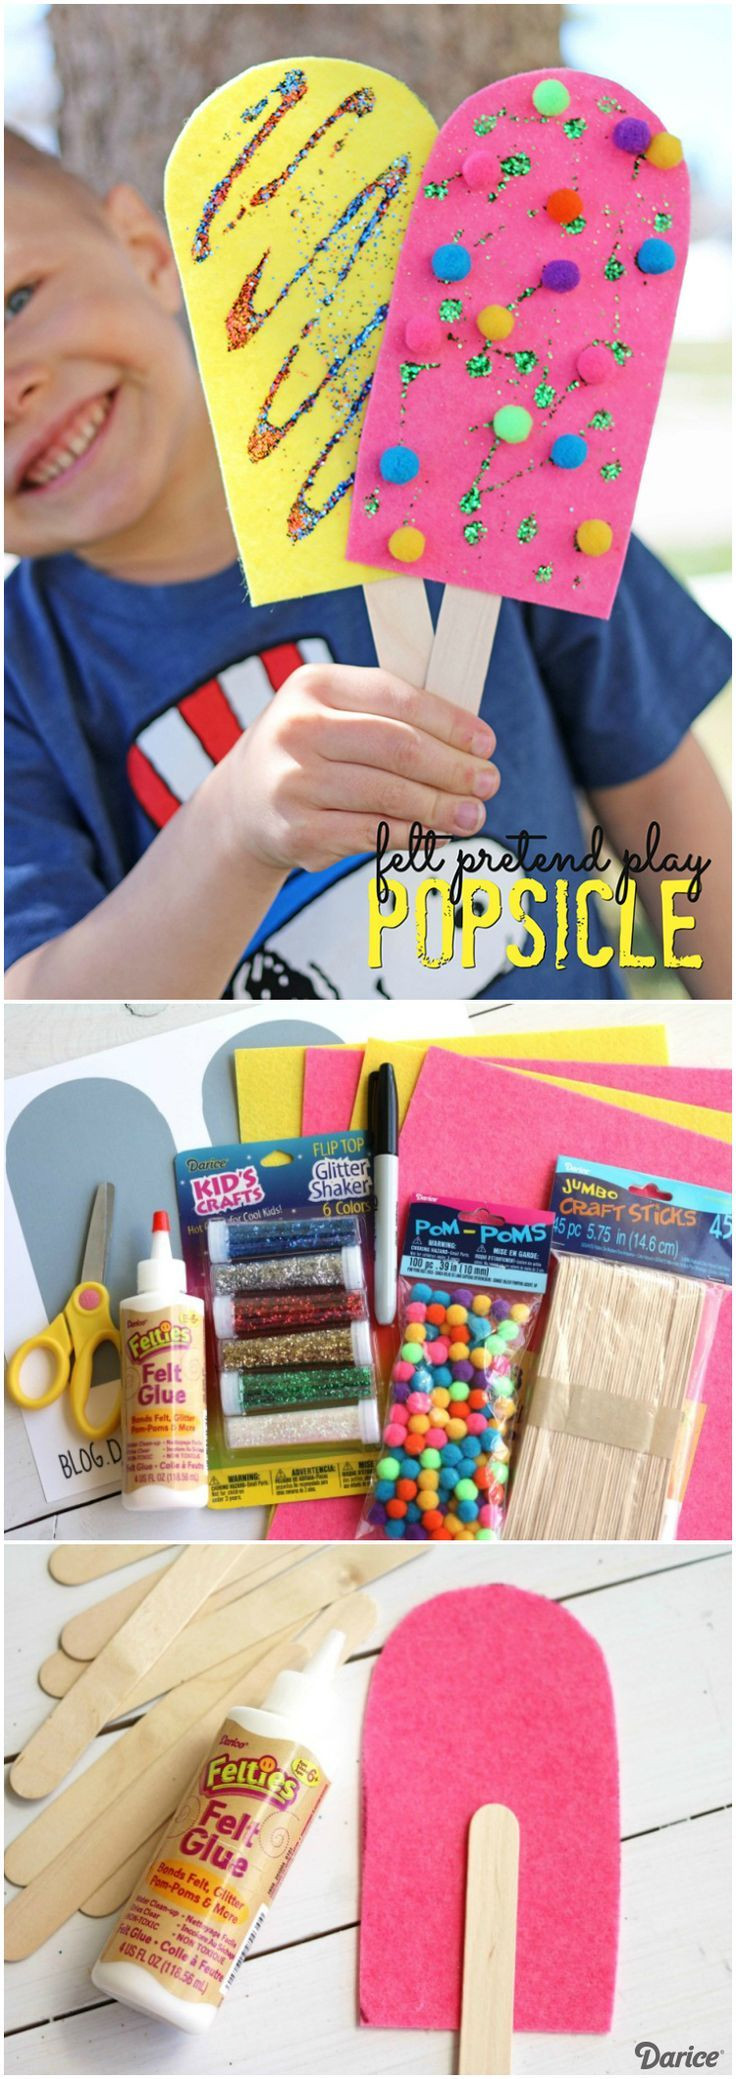 Summer Crafts Ideas For Preschoolers
 Popsicle Craft for Pretend Play Darice